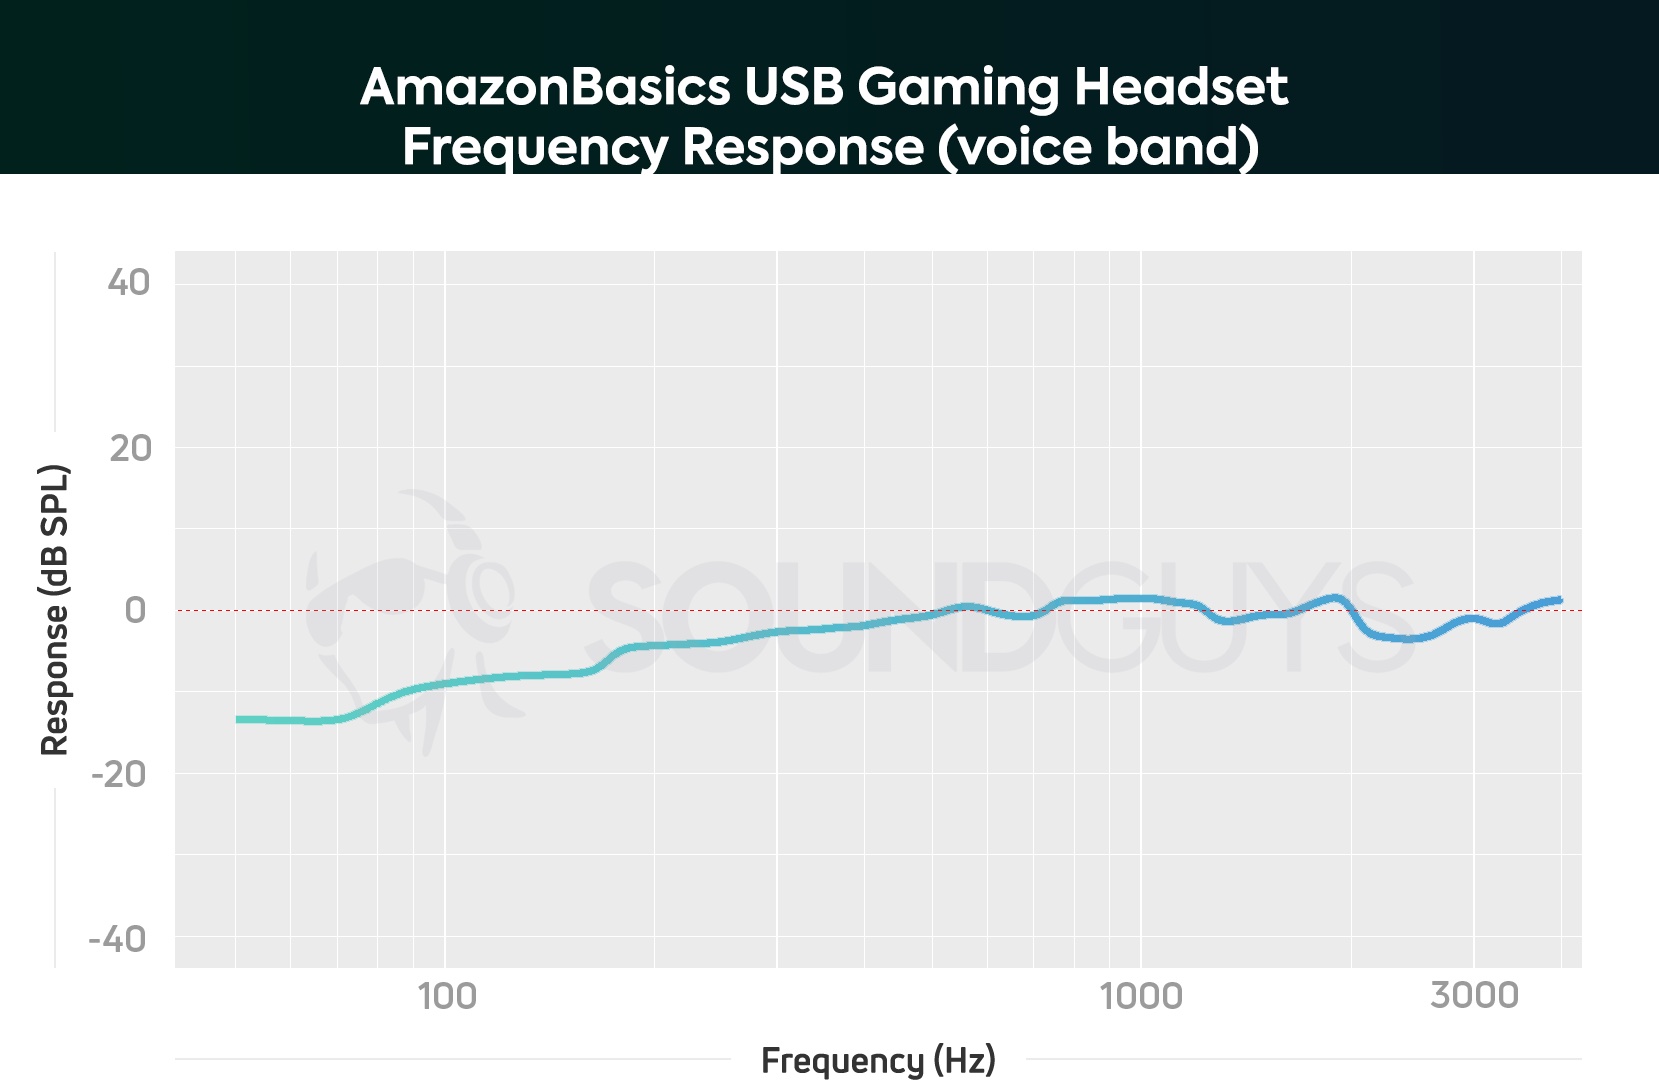 A microphone frequency response chart for the AmazonBasics USB Gaming Headset.